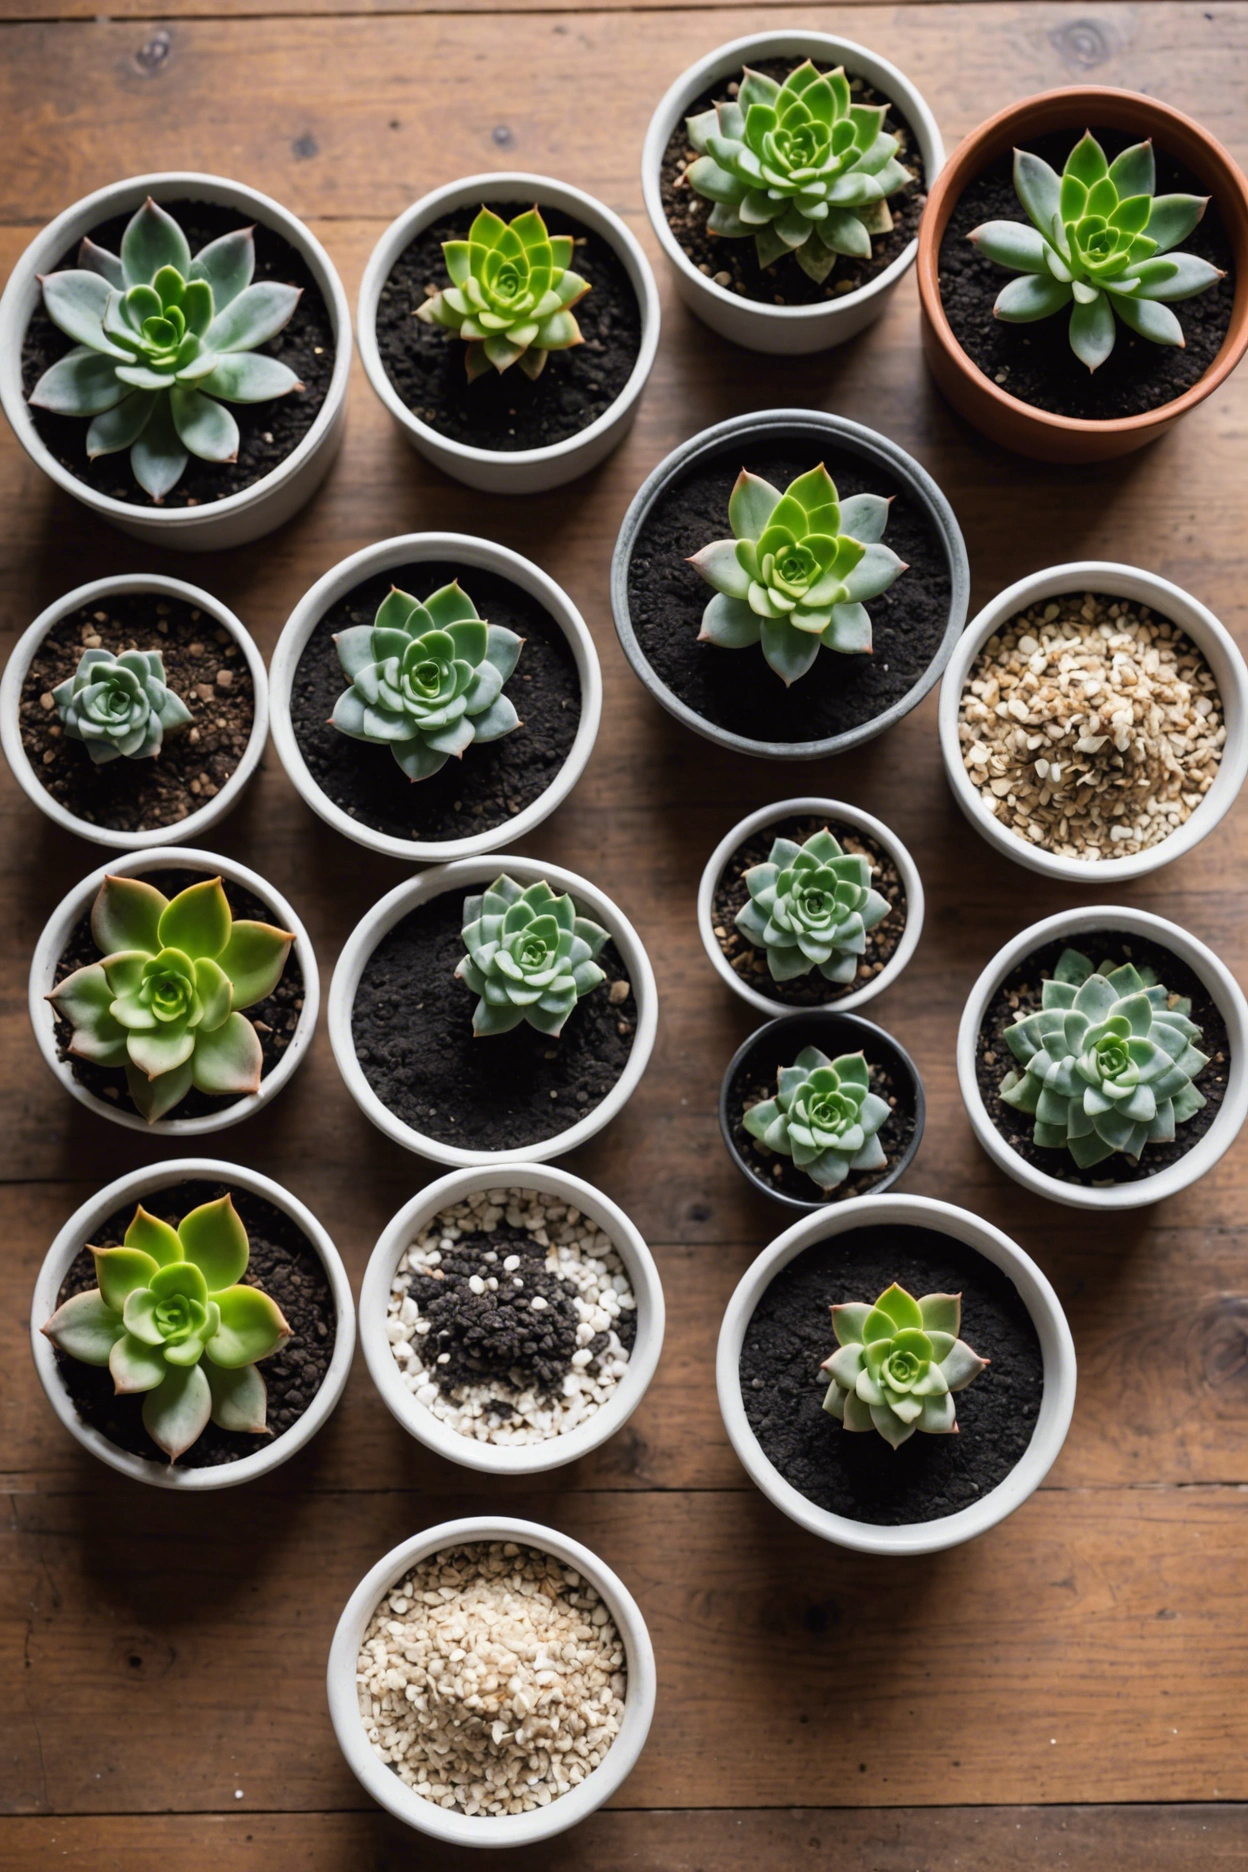 "Assorted potting soil components including coarse sand, perlite, peat moss, and compost on a wooden table with a healthy indoor succulent."